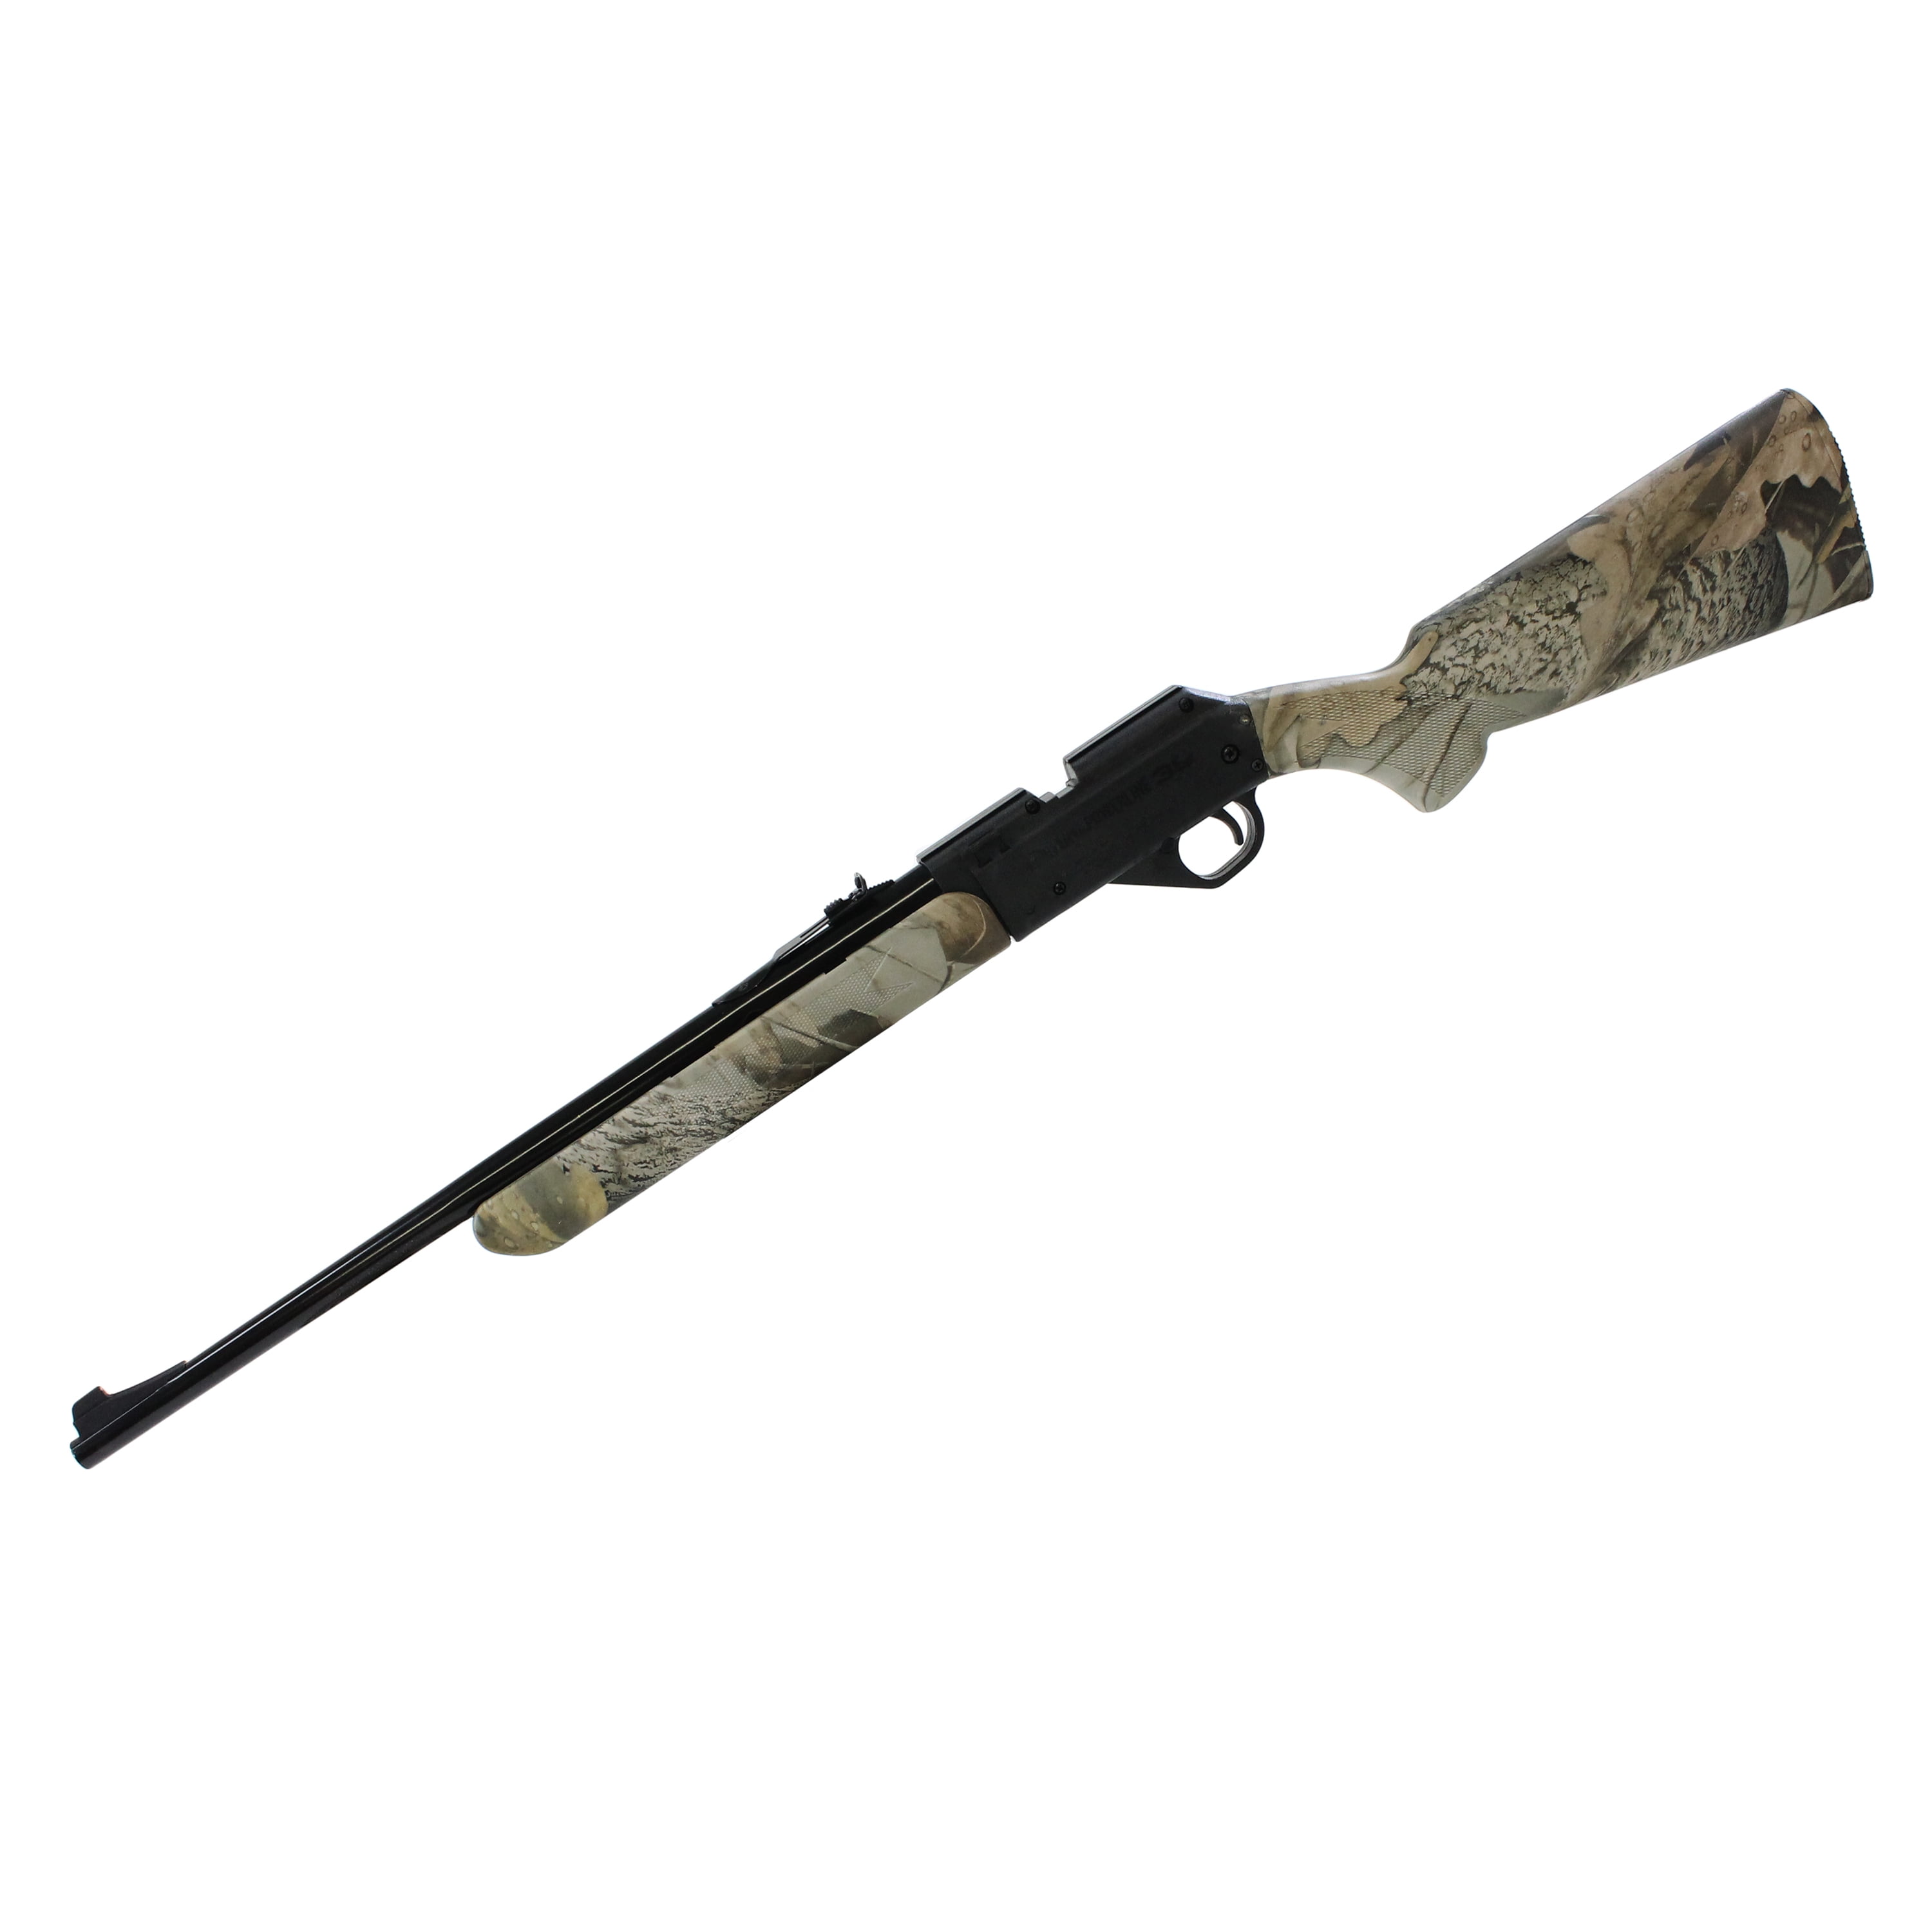 990035603 Daisy Mfg Powerline 35 Air Rifle for sale online 